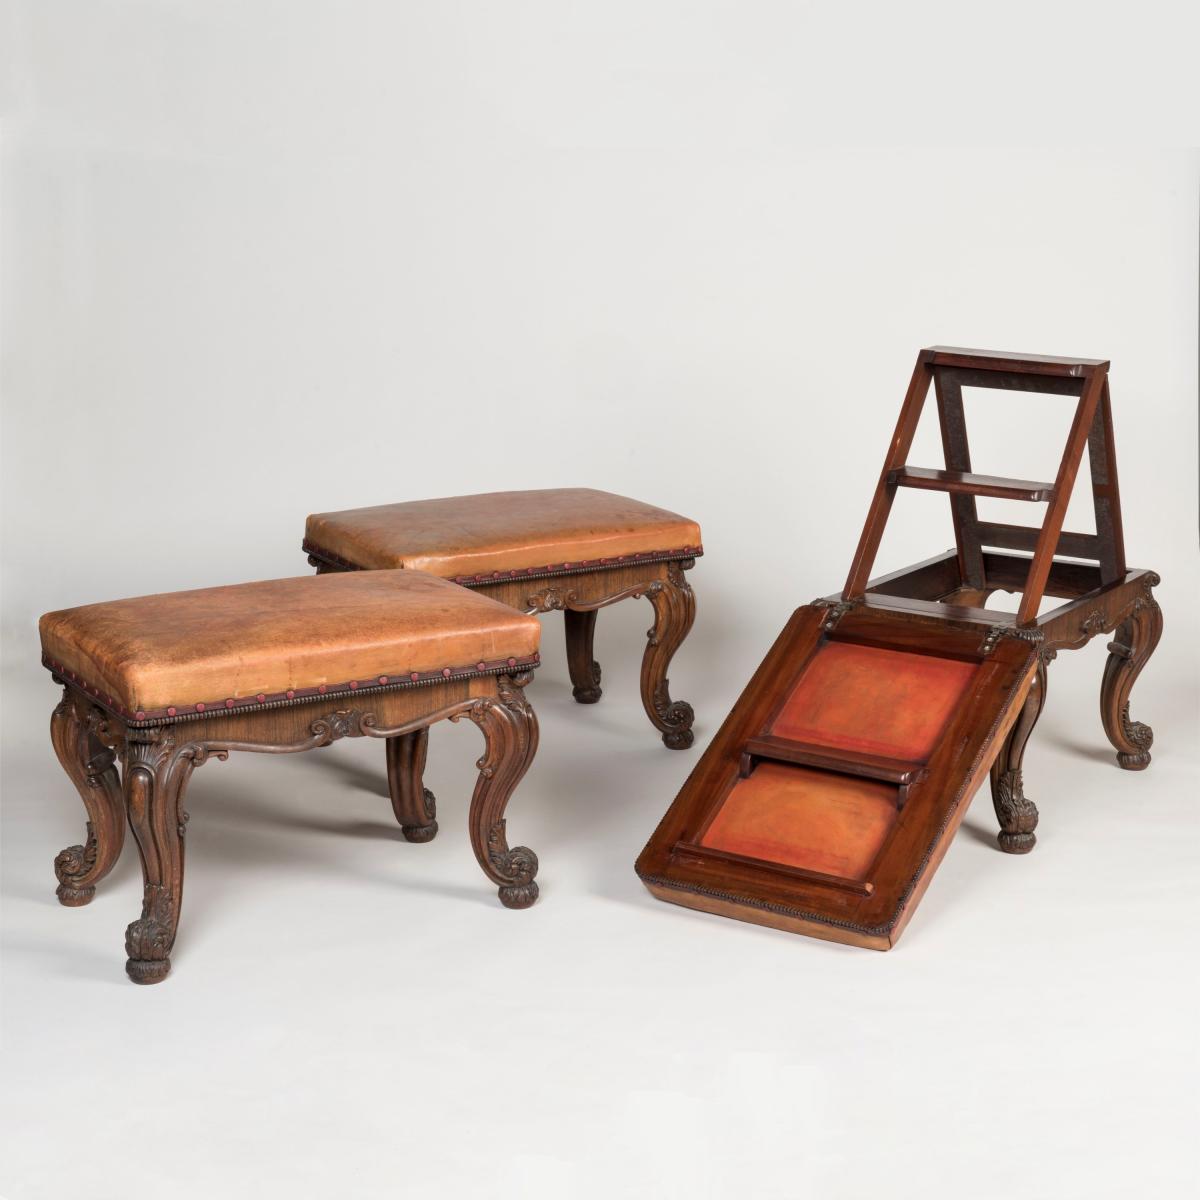 Three Rosewood Stools Firmly Attributed to Gillows